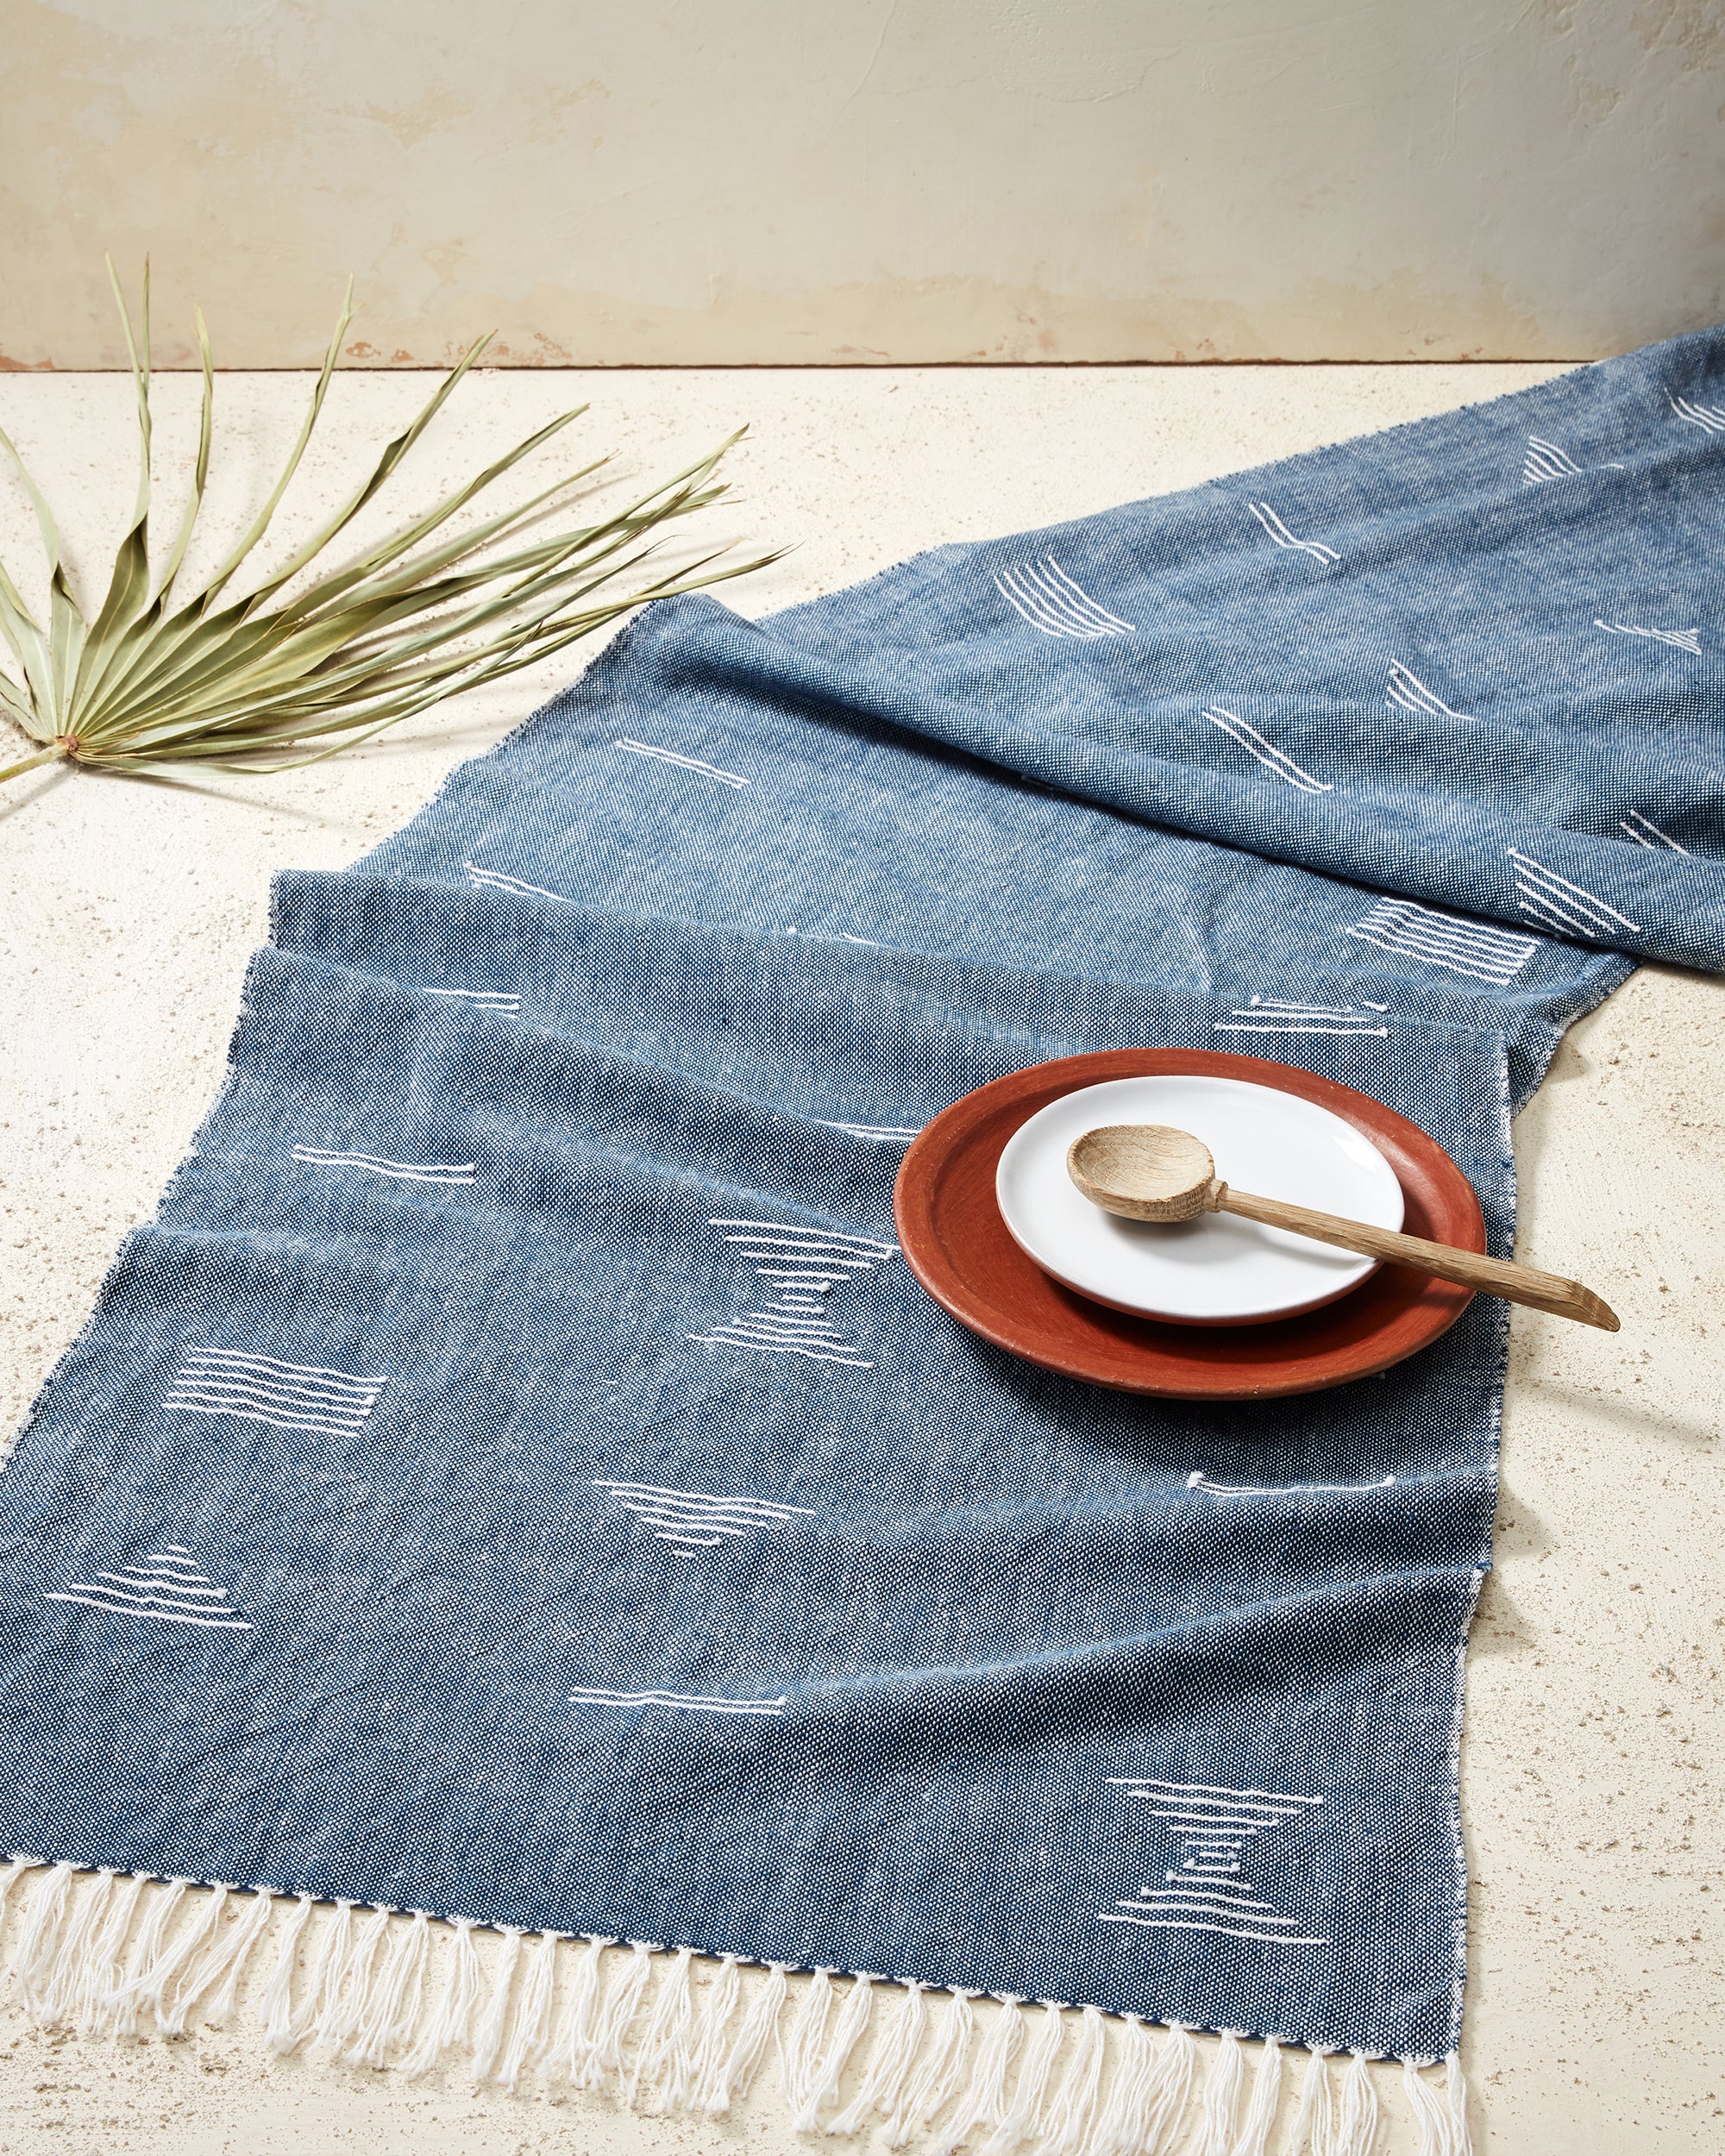 Ethically handwoven table runner in blue with white geometric shapes